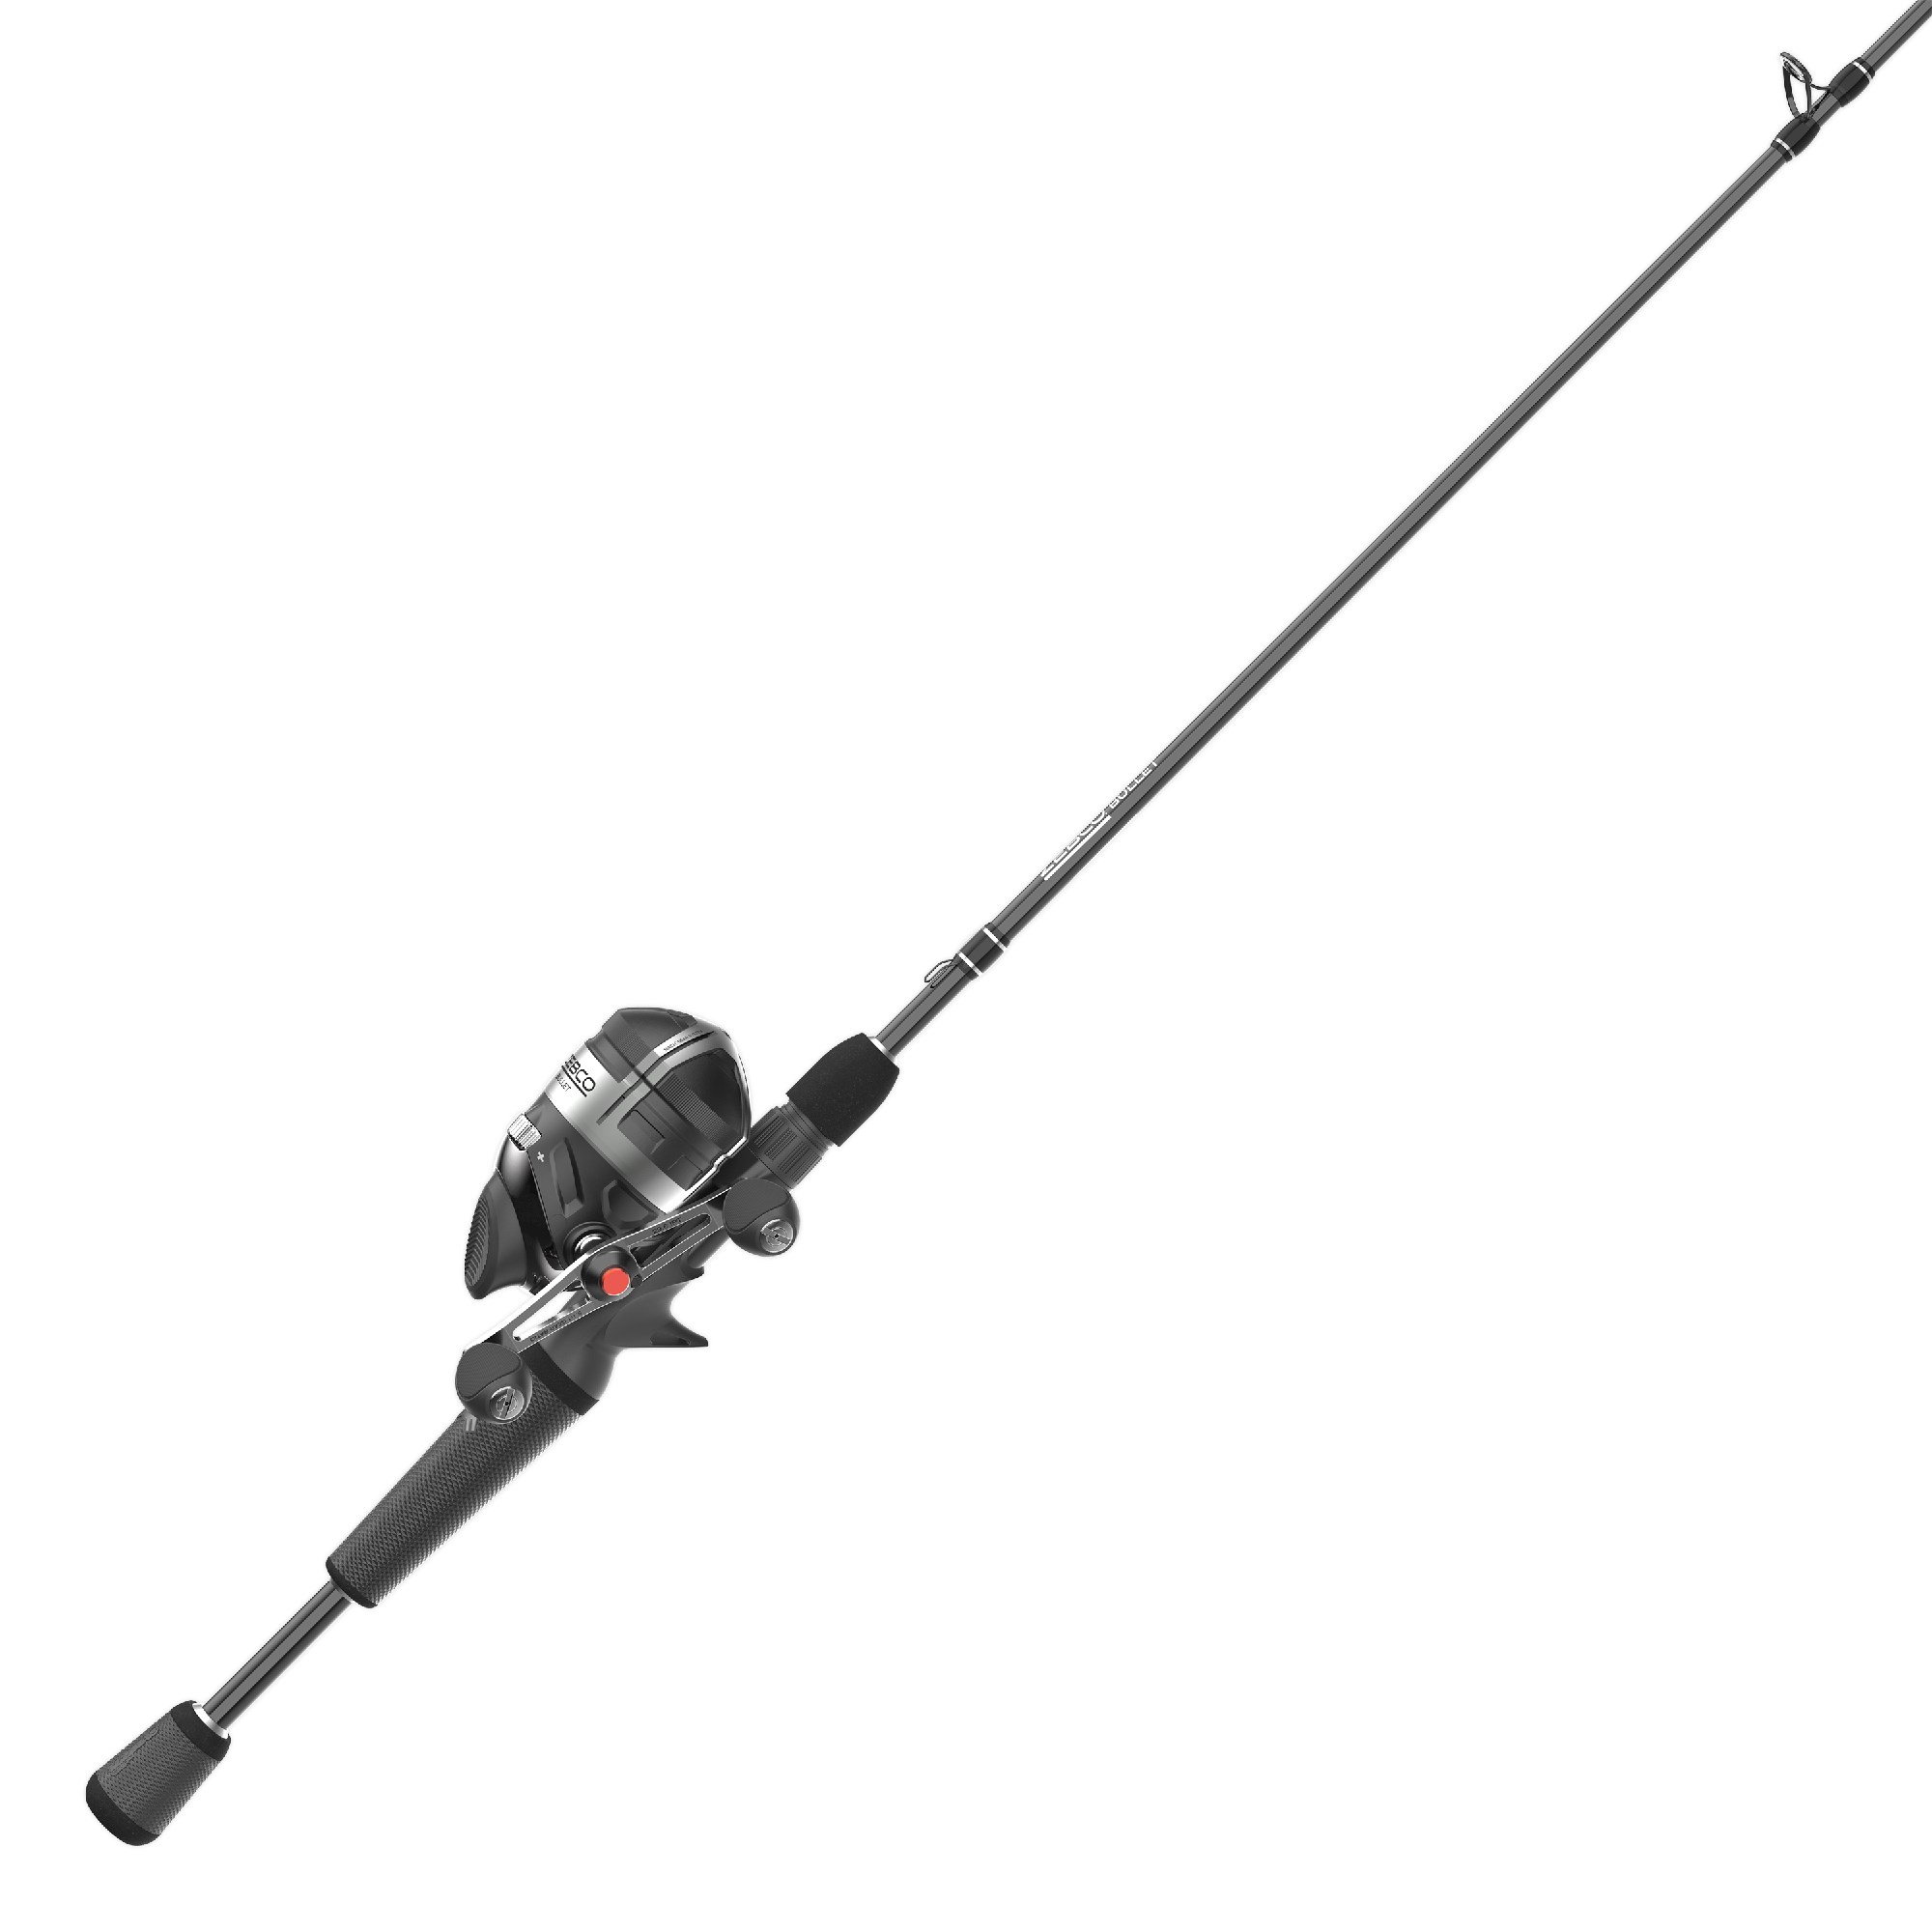 https://cs1.0ps.us/original/opplanet-zebco-bullet-spincast-combo-rod-6ft-6in-medium-fast-2-pieces-zb30662ma-ns3-main